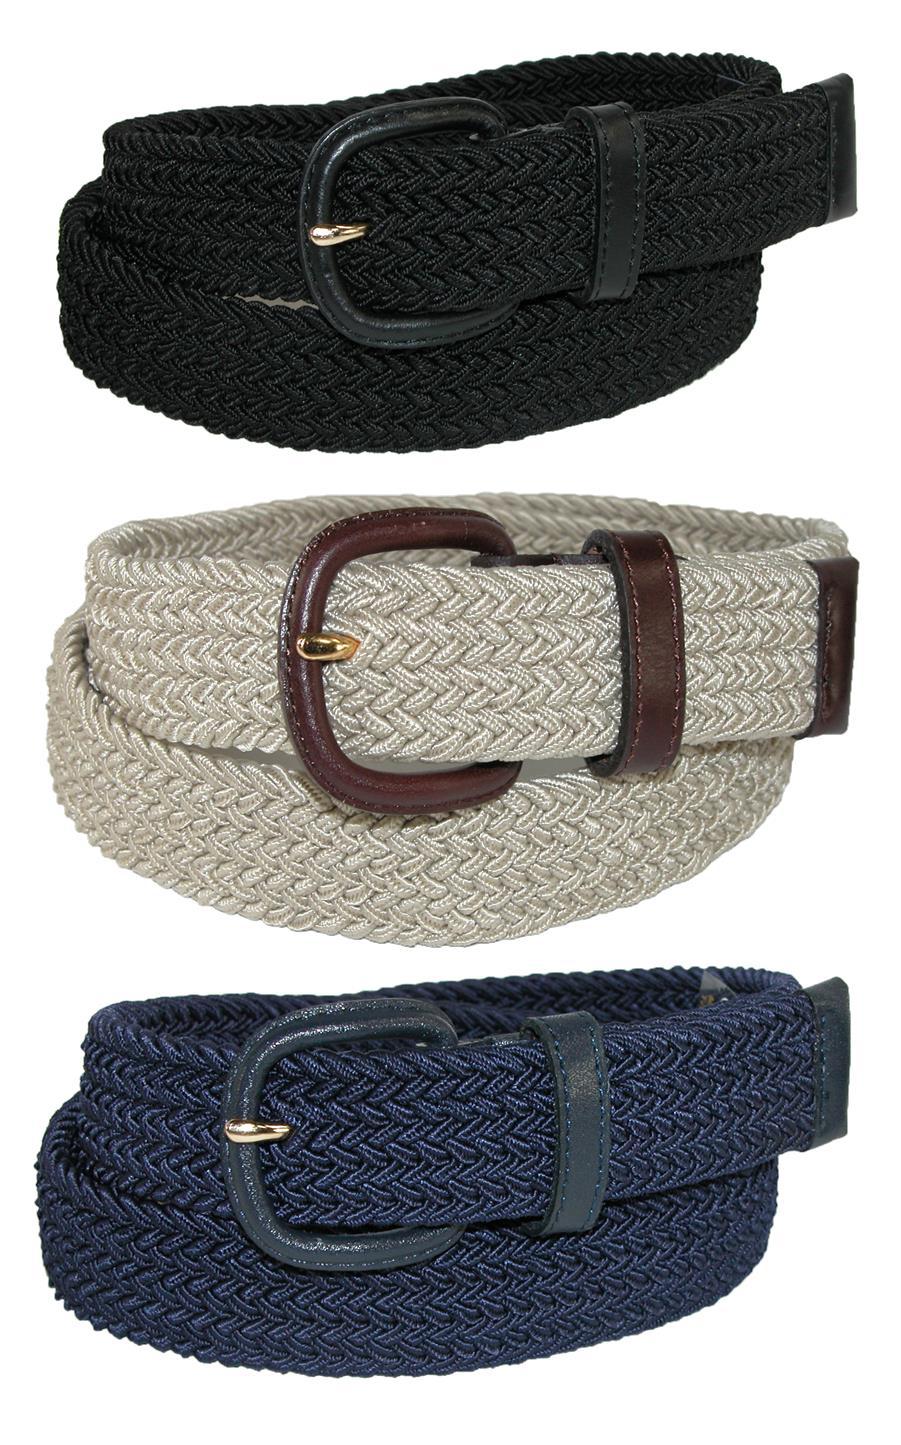 Aquarius Men's Stretch Belt with Covered Buckle (Big & Tall Available) (Pack of 3)